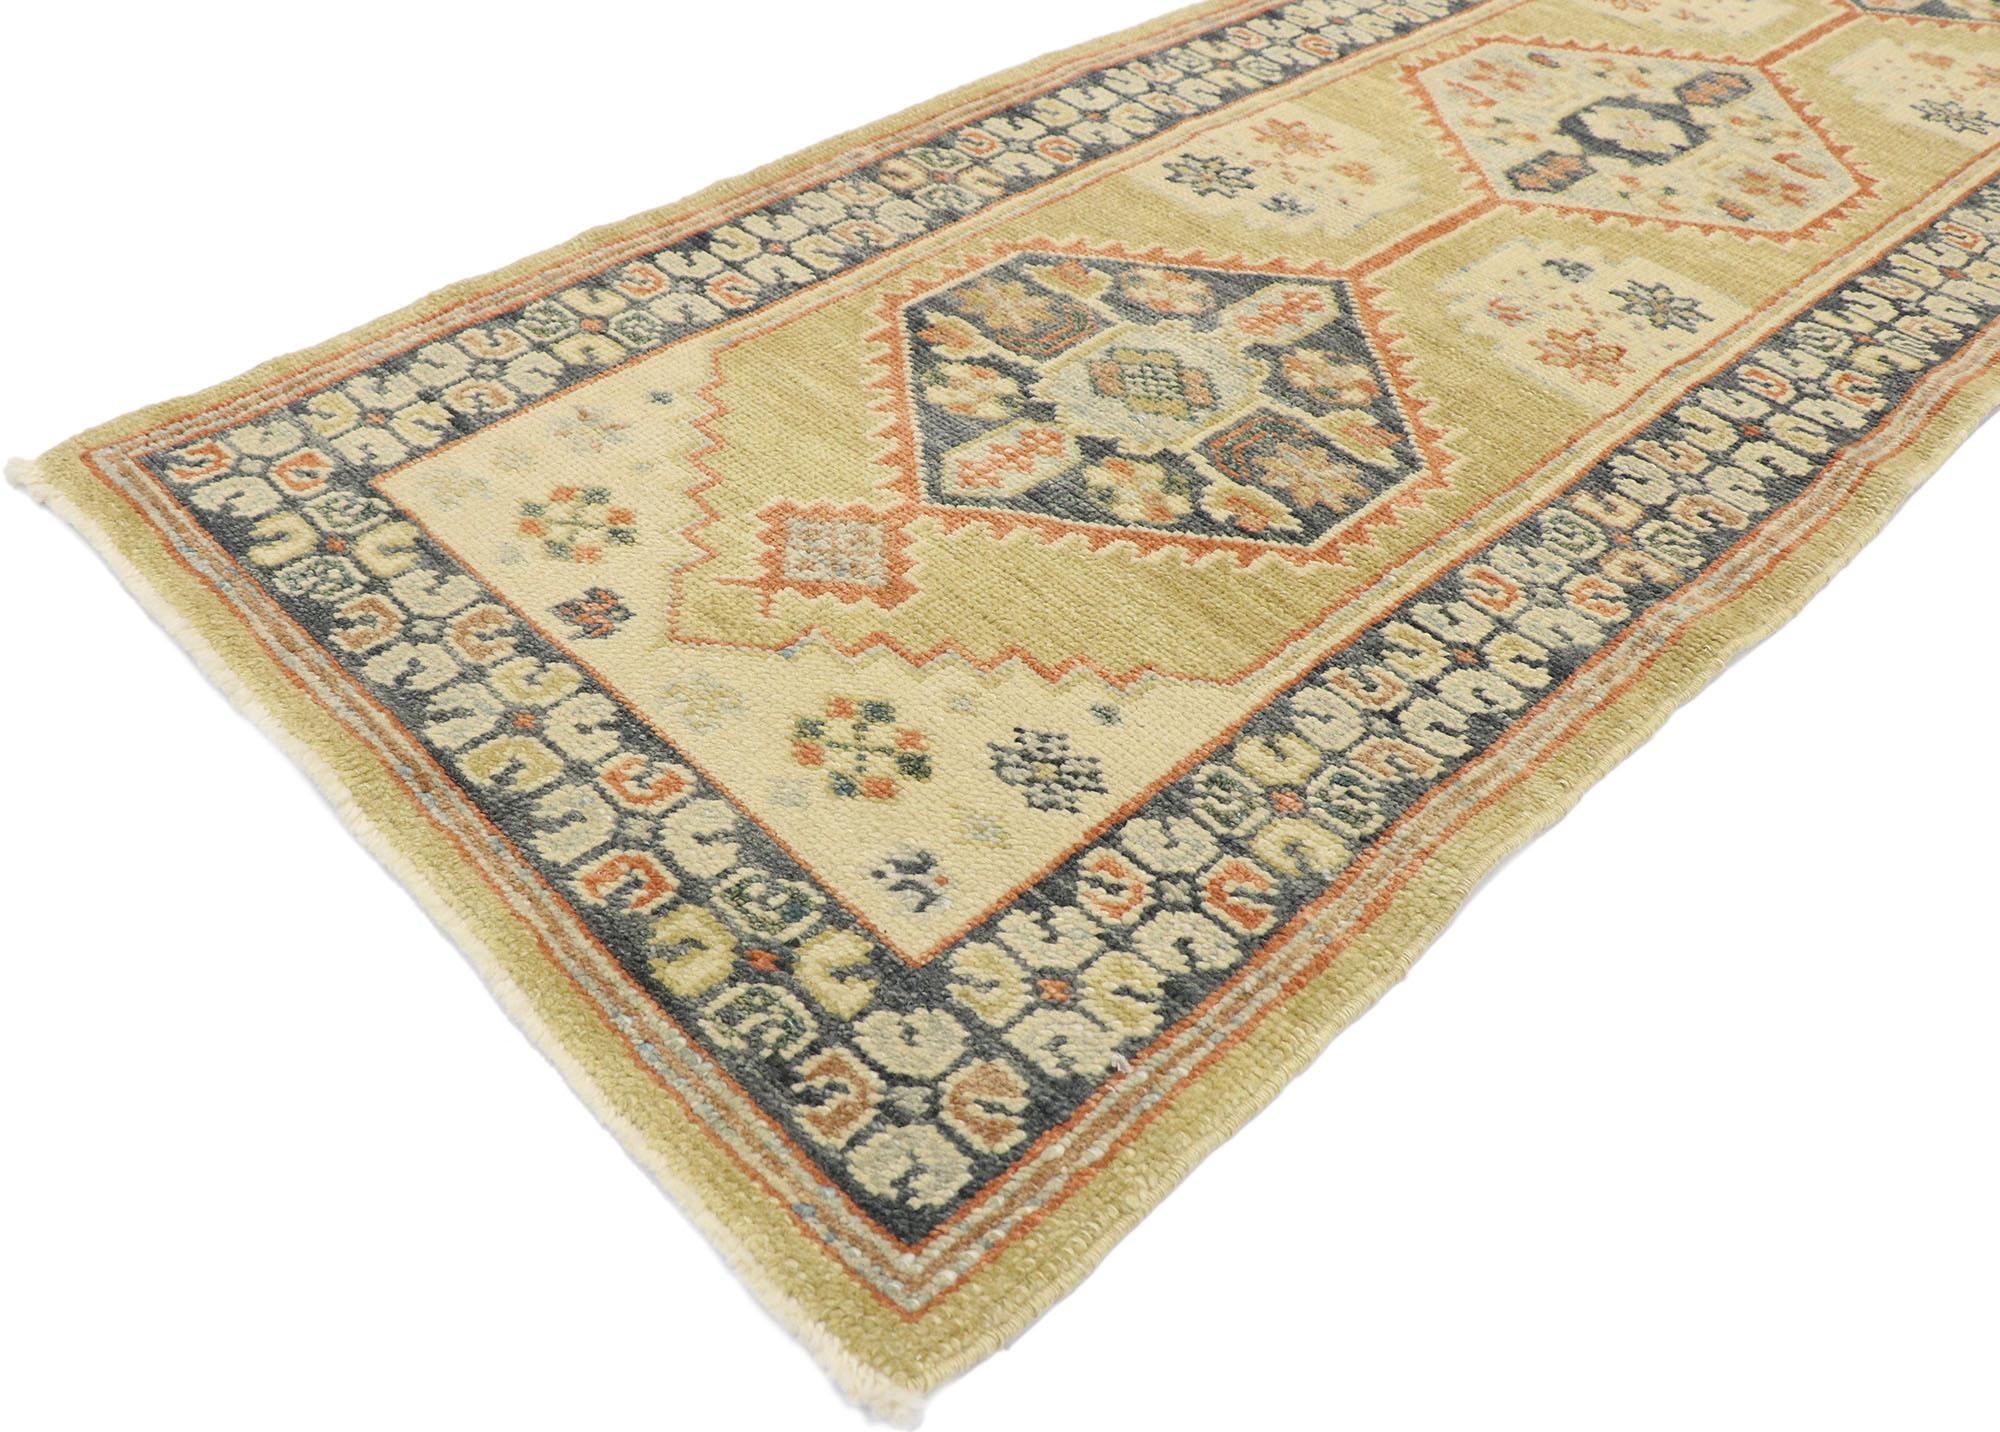 53487, new contemporary Turkish Oushak runner with Modern Tribal style. With its bold expressive design, incredible detail and texture, this hand-knotted wool contemporary Turkish Oushak rug is a captivating vision of woven beauty. The abrashed tan